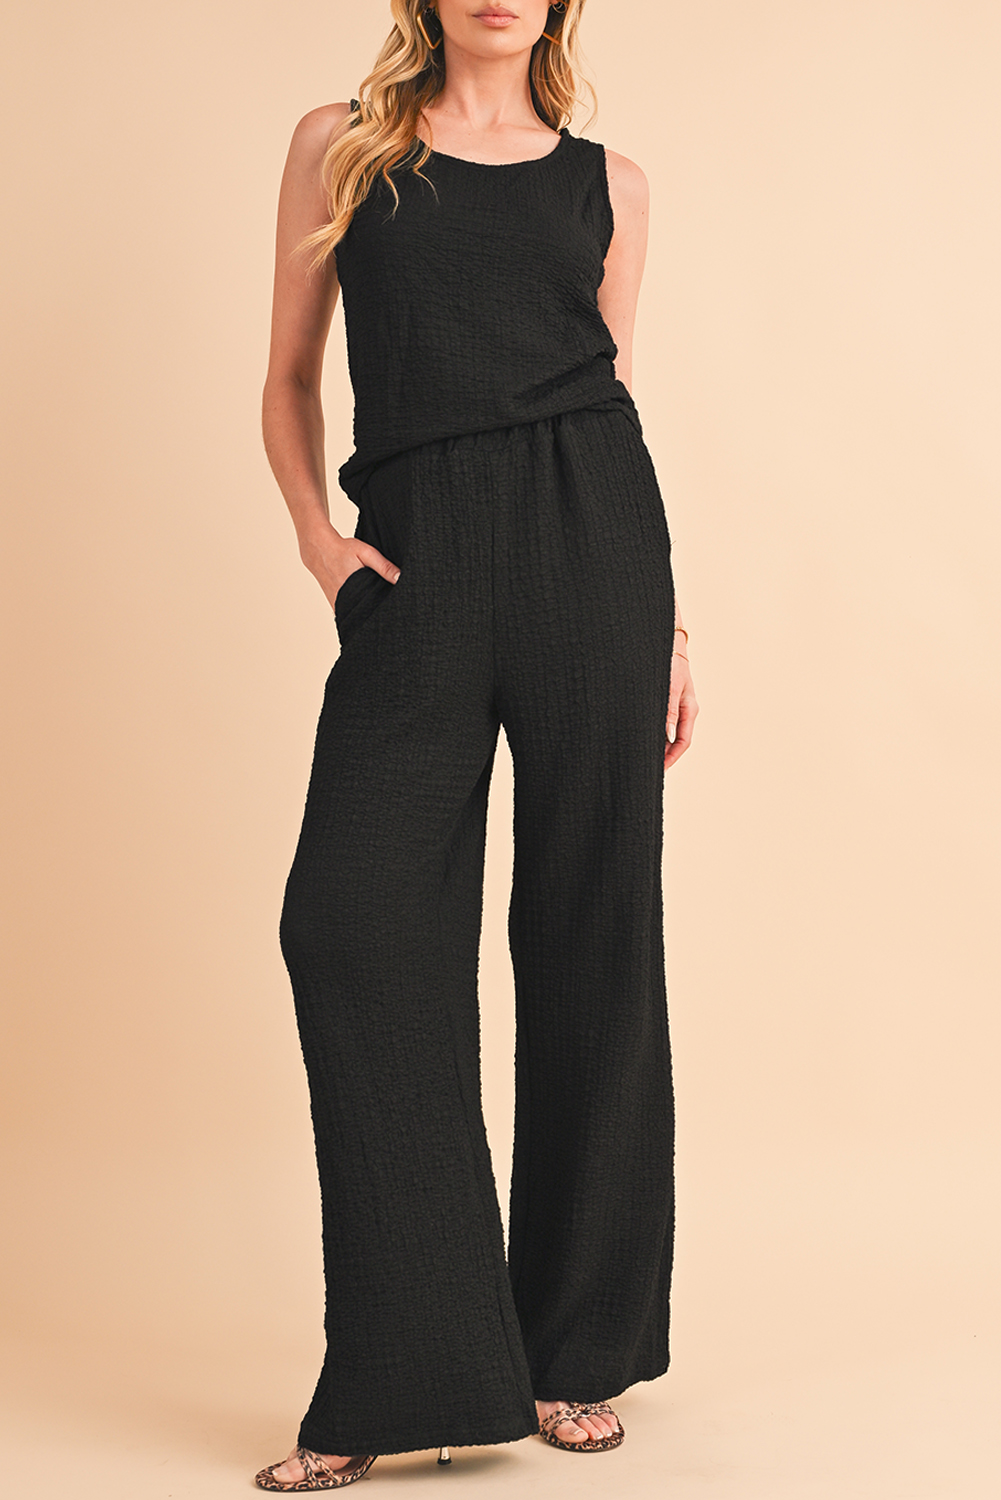 Shewin Wholesale Dropshippers Black Crinkled U Neck Tank and Wide Leg PANTS Set